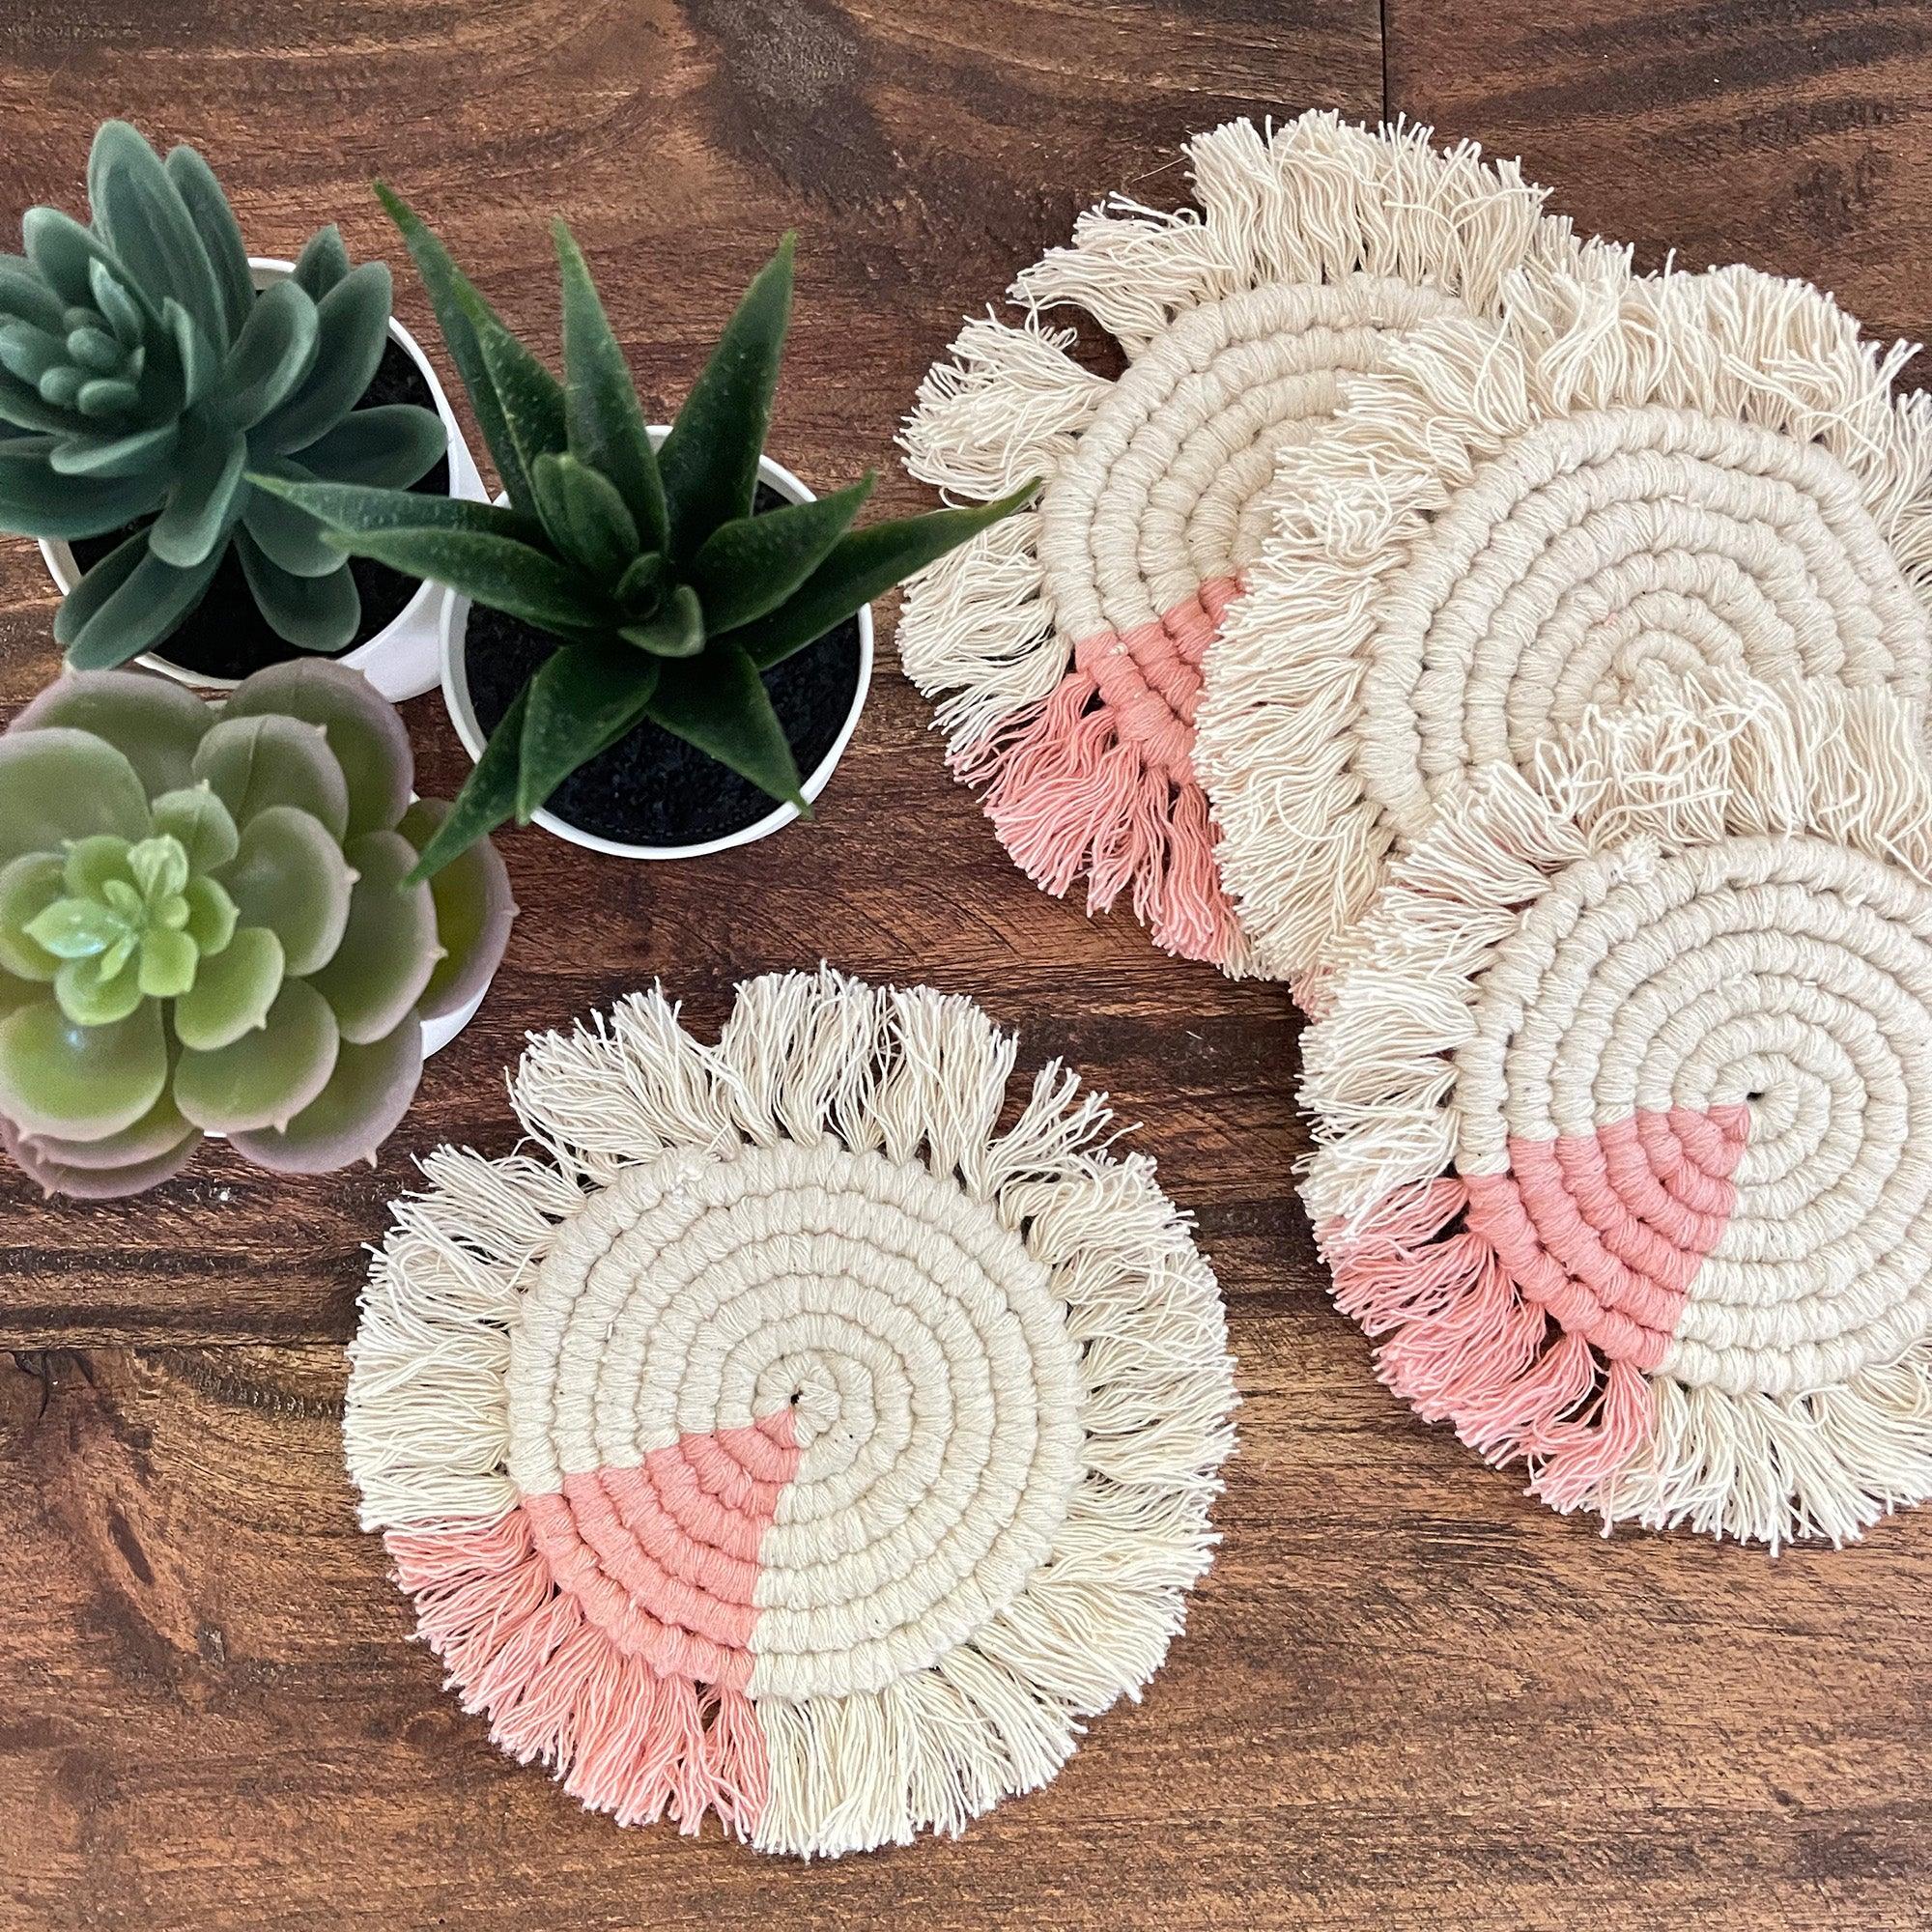 Macrame Coasters in Blush with Fringe - Set of 4 - Life In Alignment